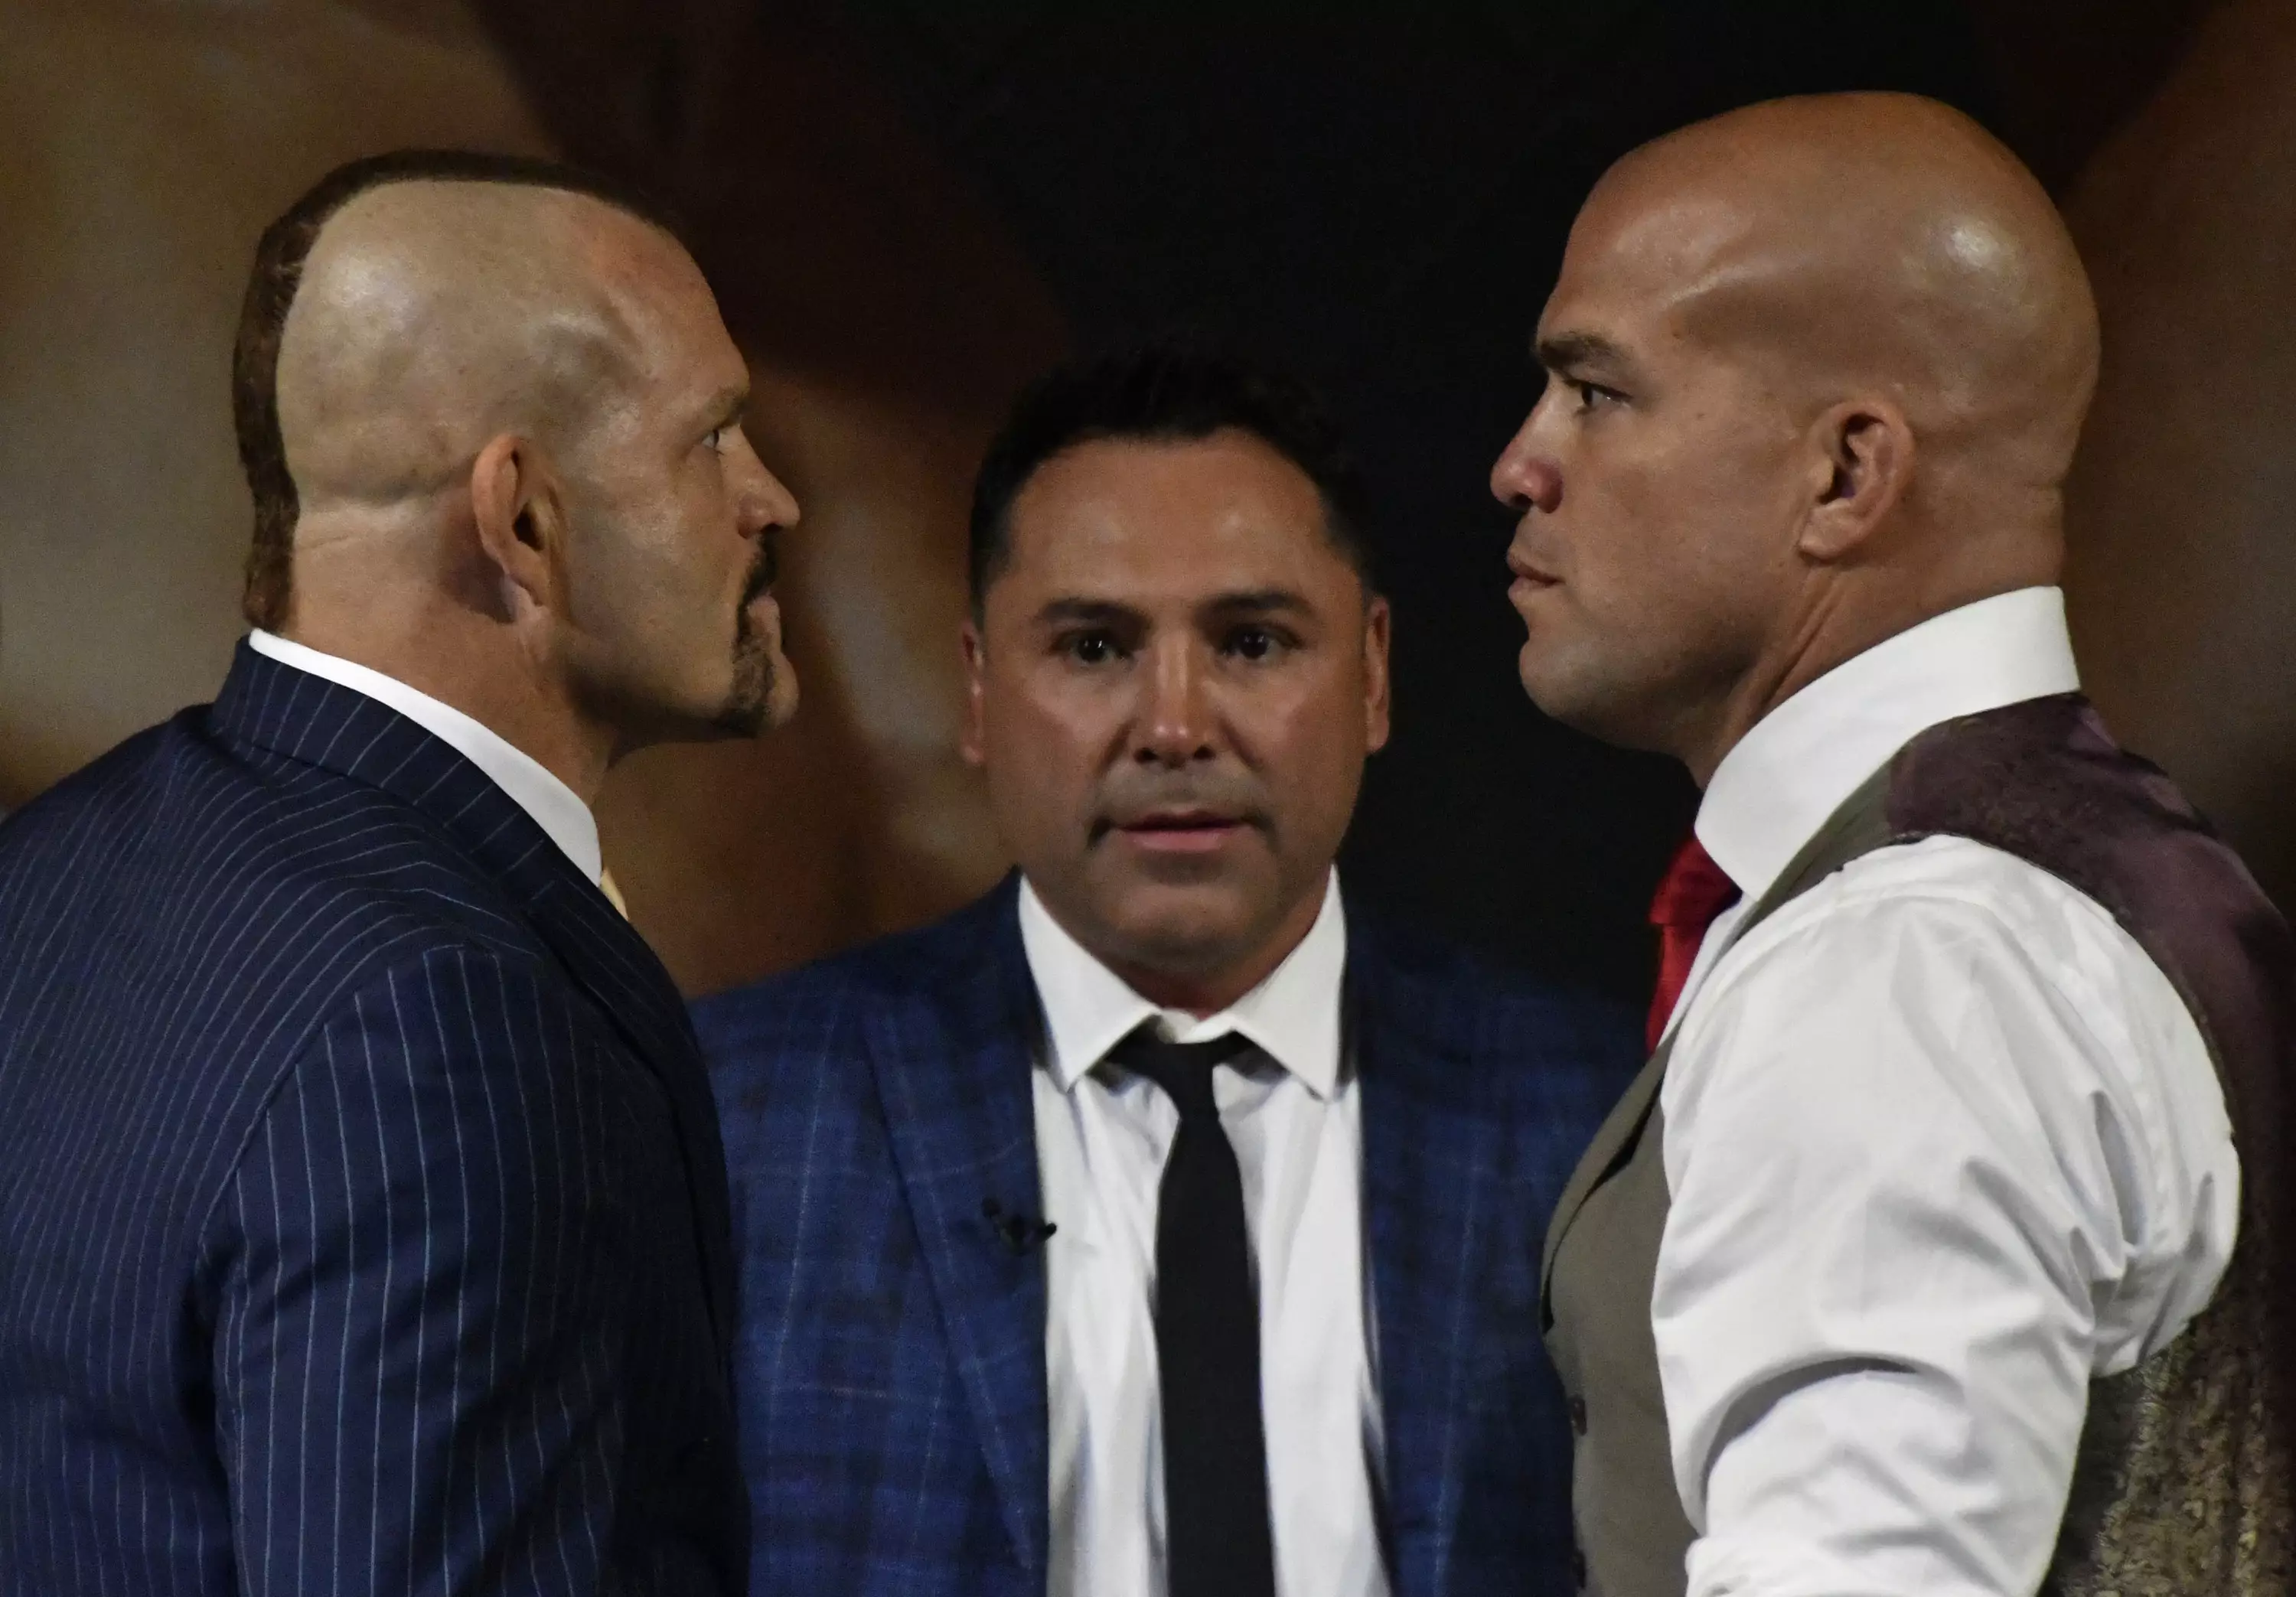 Liddell (L) and Ortiz (R) face off in 2018. (Image